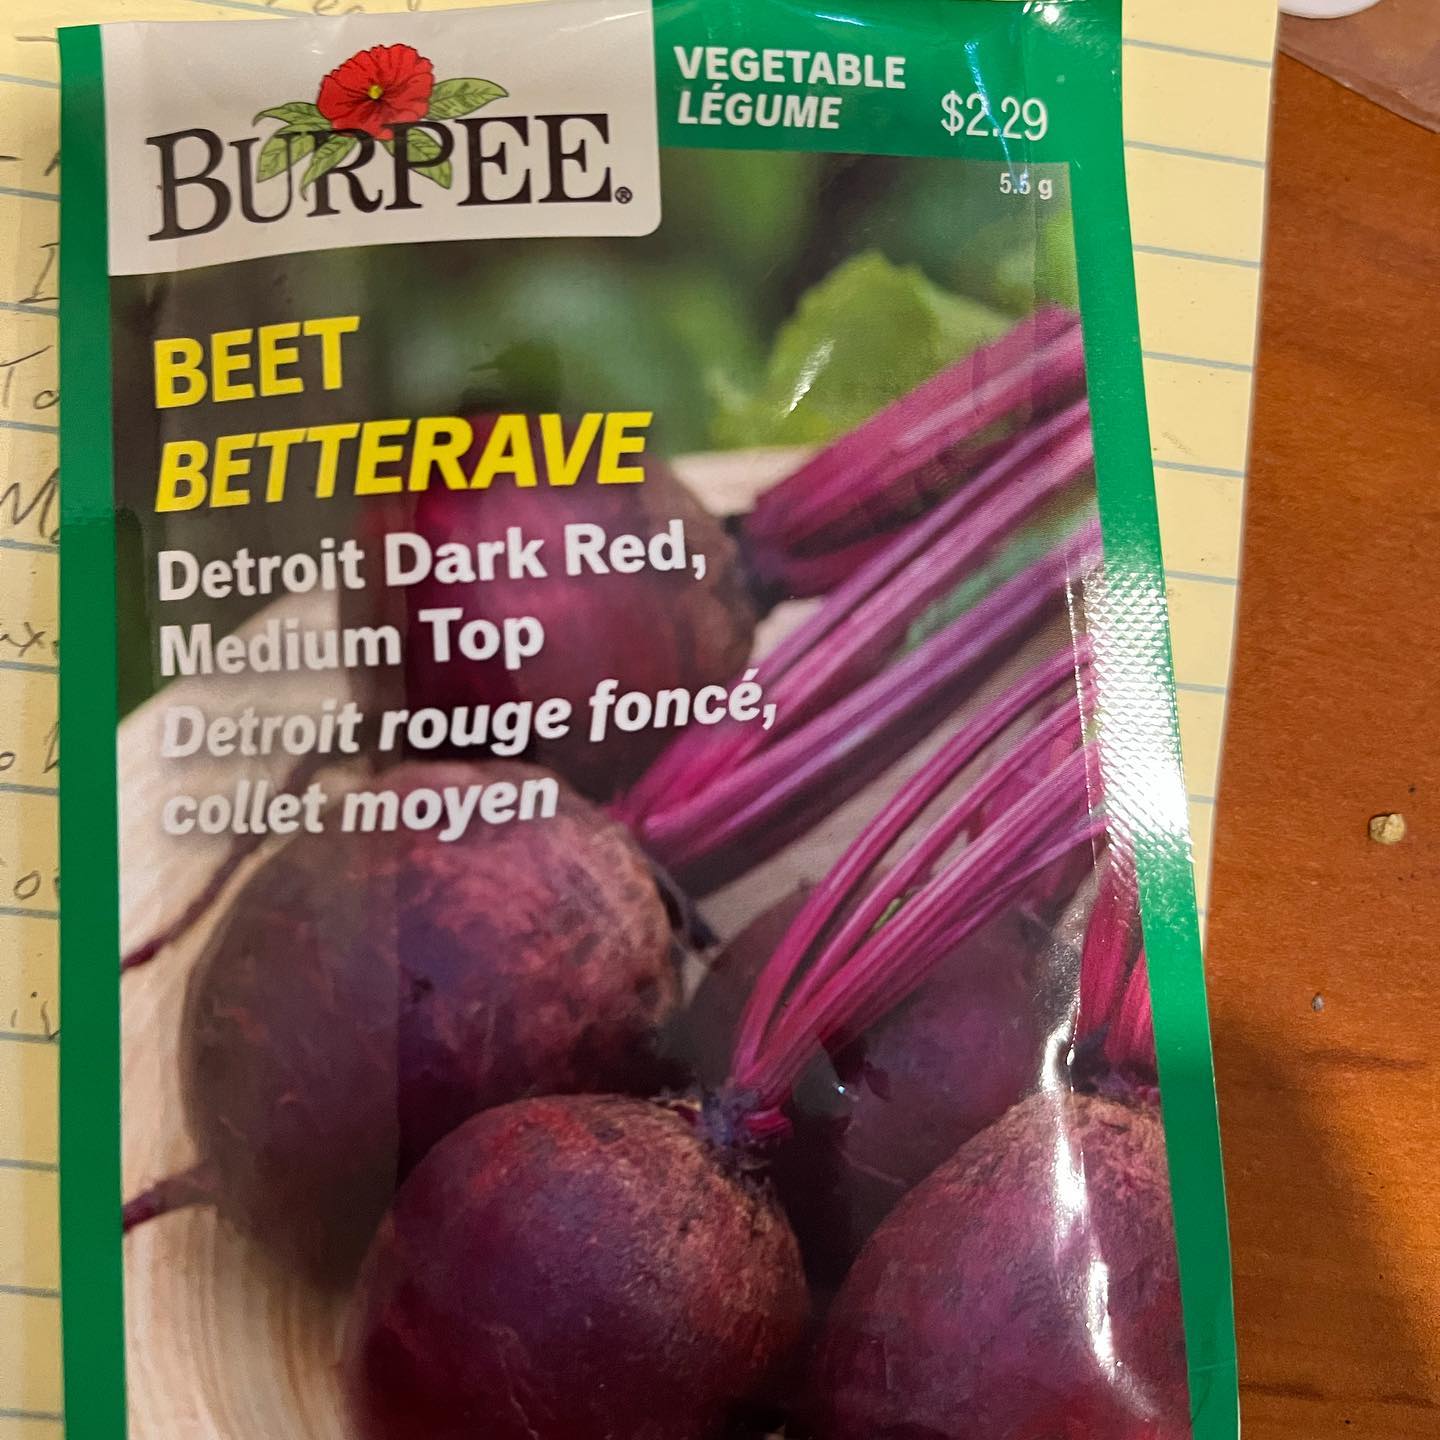 You need fat beets for a betterave.